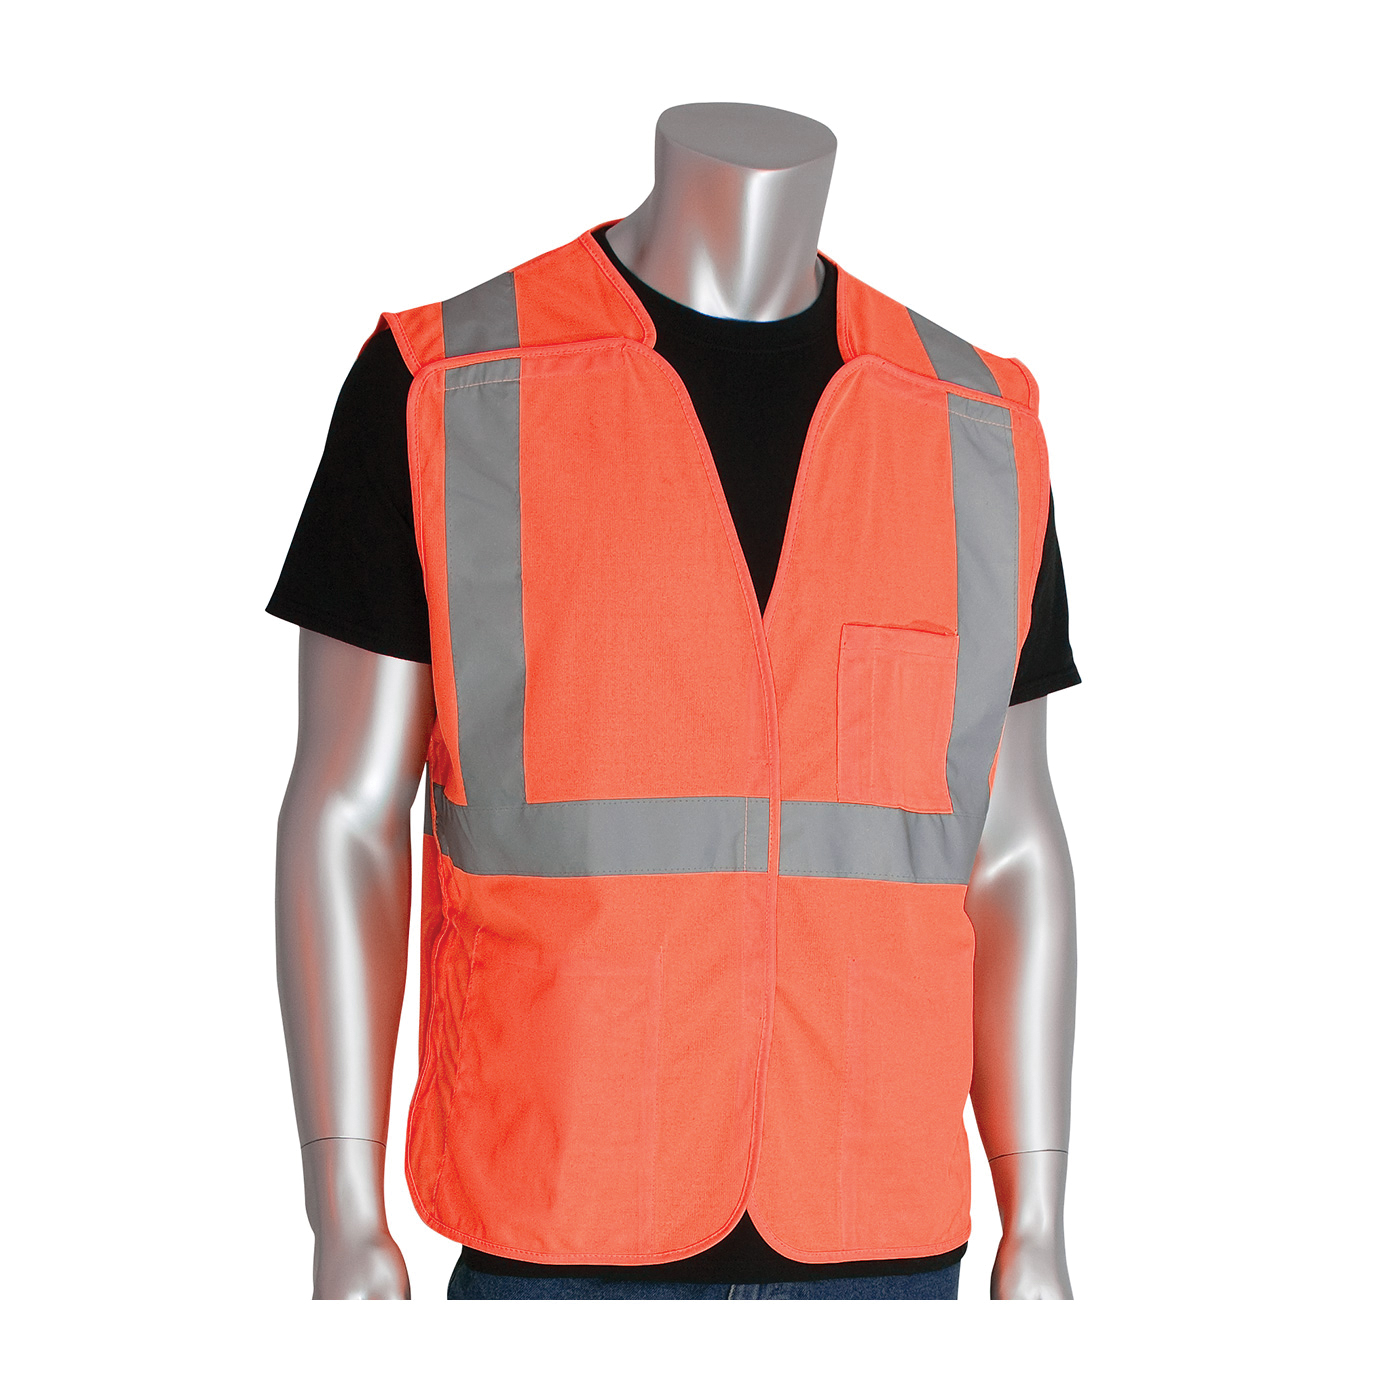 PIP® 302-5PVOR-3X Safety Vest, 3XL, Hi-Viz Orange, Polyester, Hook and Loop Closure, 3 Pockets, ANSI Class: Class 2, Specifications Met: ANSI 107 Type R